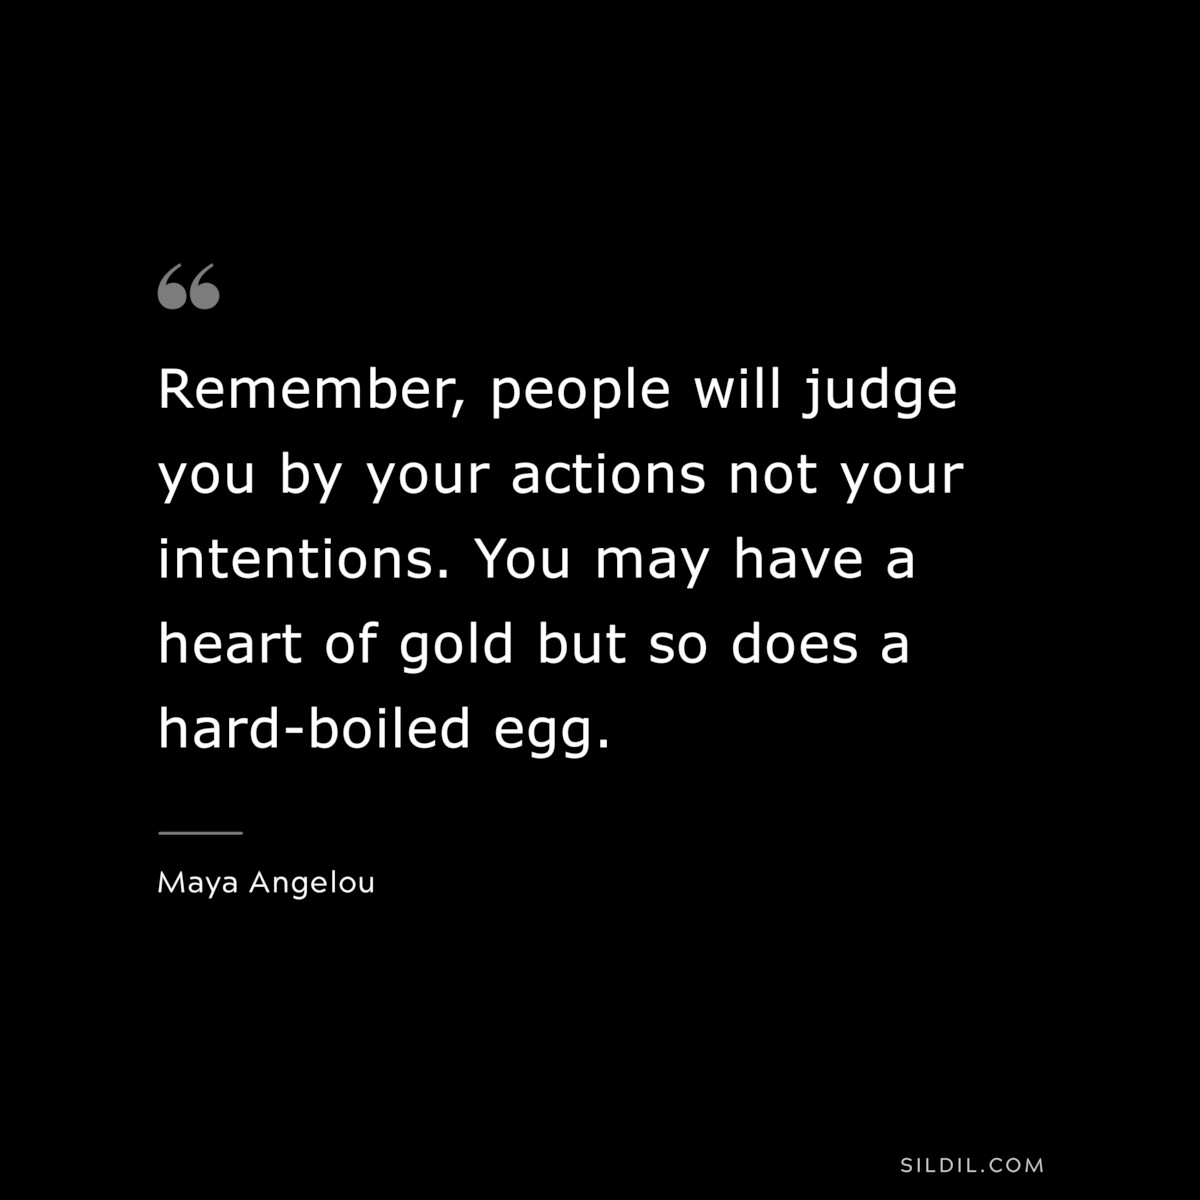 Remember, people will judge you by your actions not your intentions. You may have a heart of gold but so does a hard-boiled egg. ― Maya Angelou